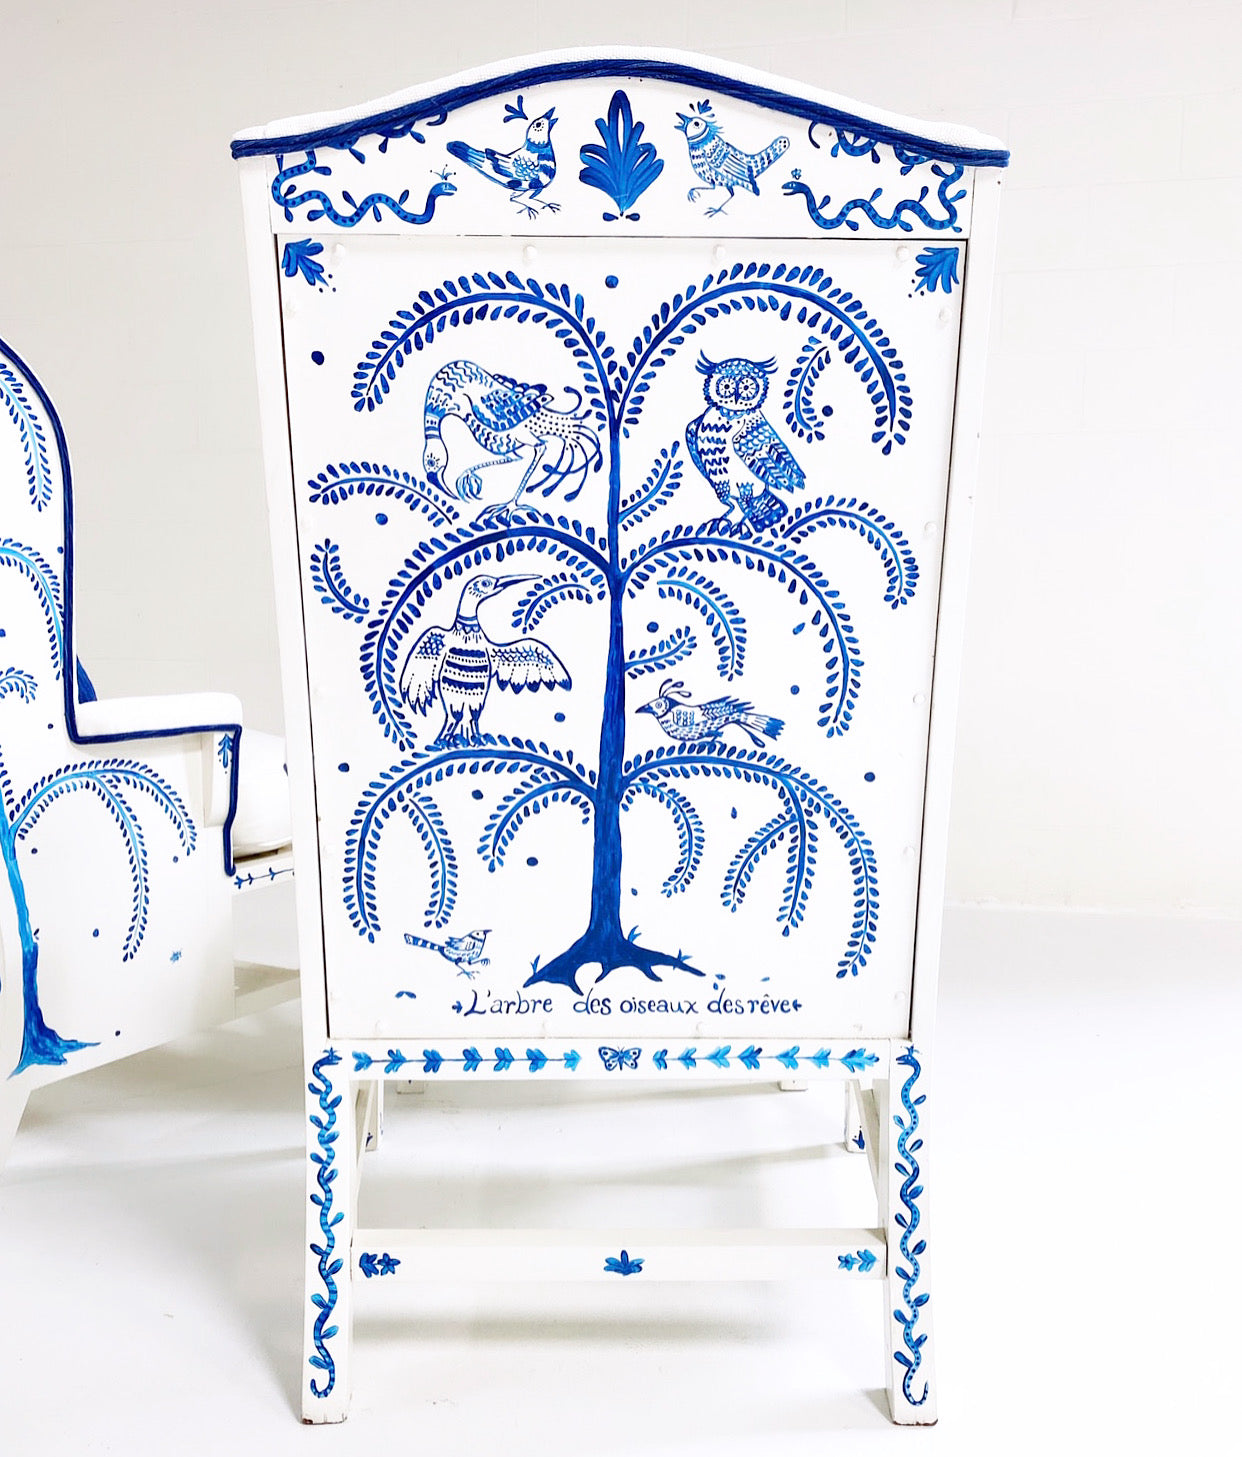 One-of-a-Kind, Hand-Painted 'Tree of Dream Birds' Set, Pair of Wingbacks with Ottoman